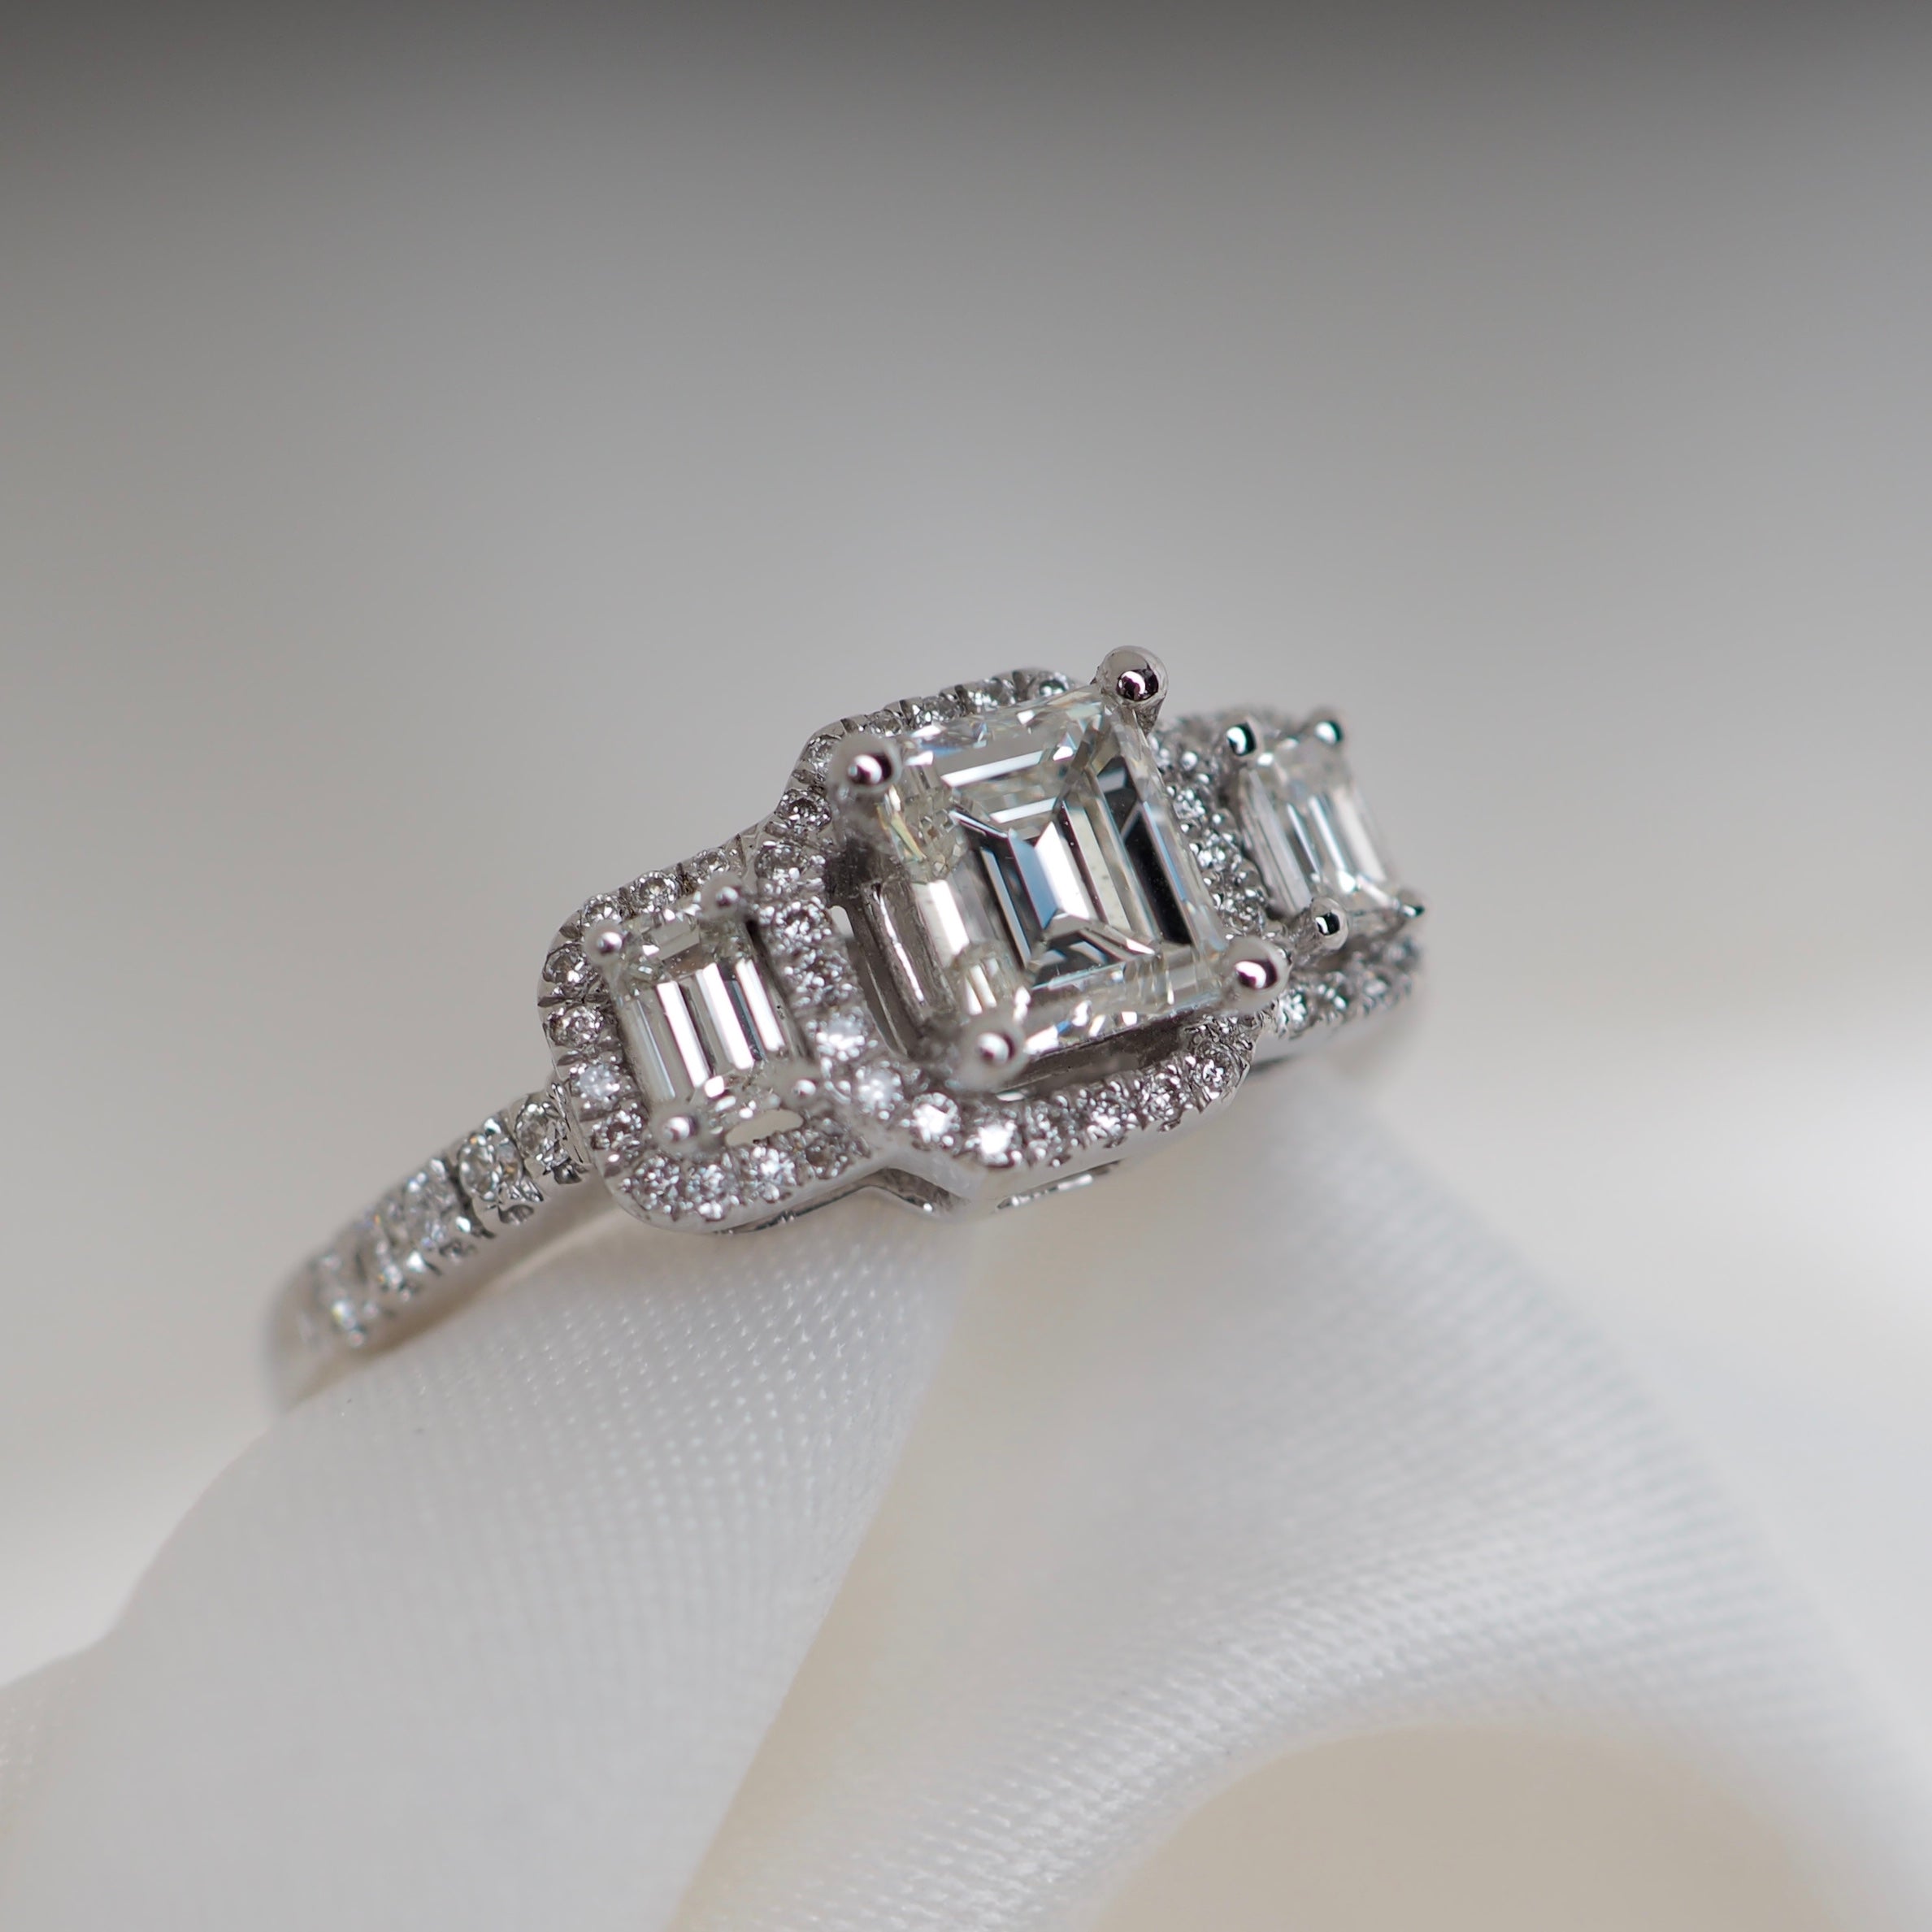 Fancy emerald cut trilogy engagement ring diamond halo white gold Harrogate jewellers Fogal and barnes 